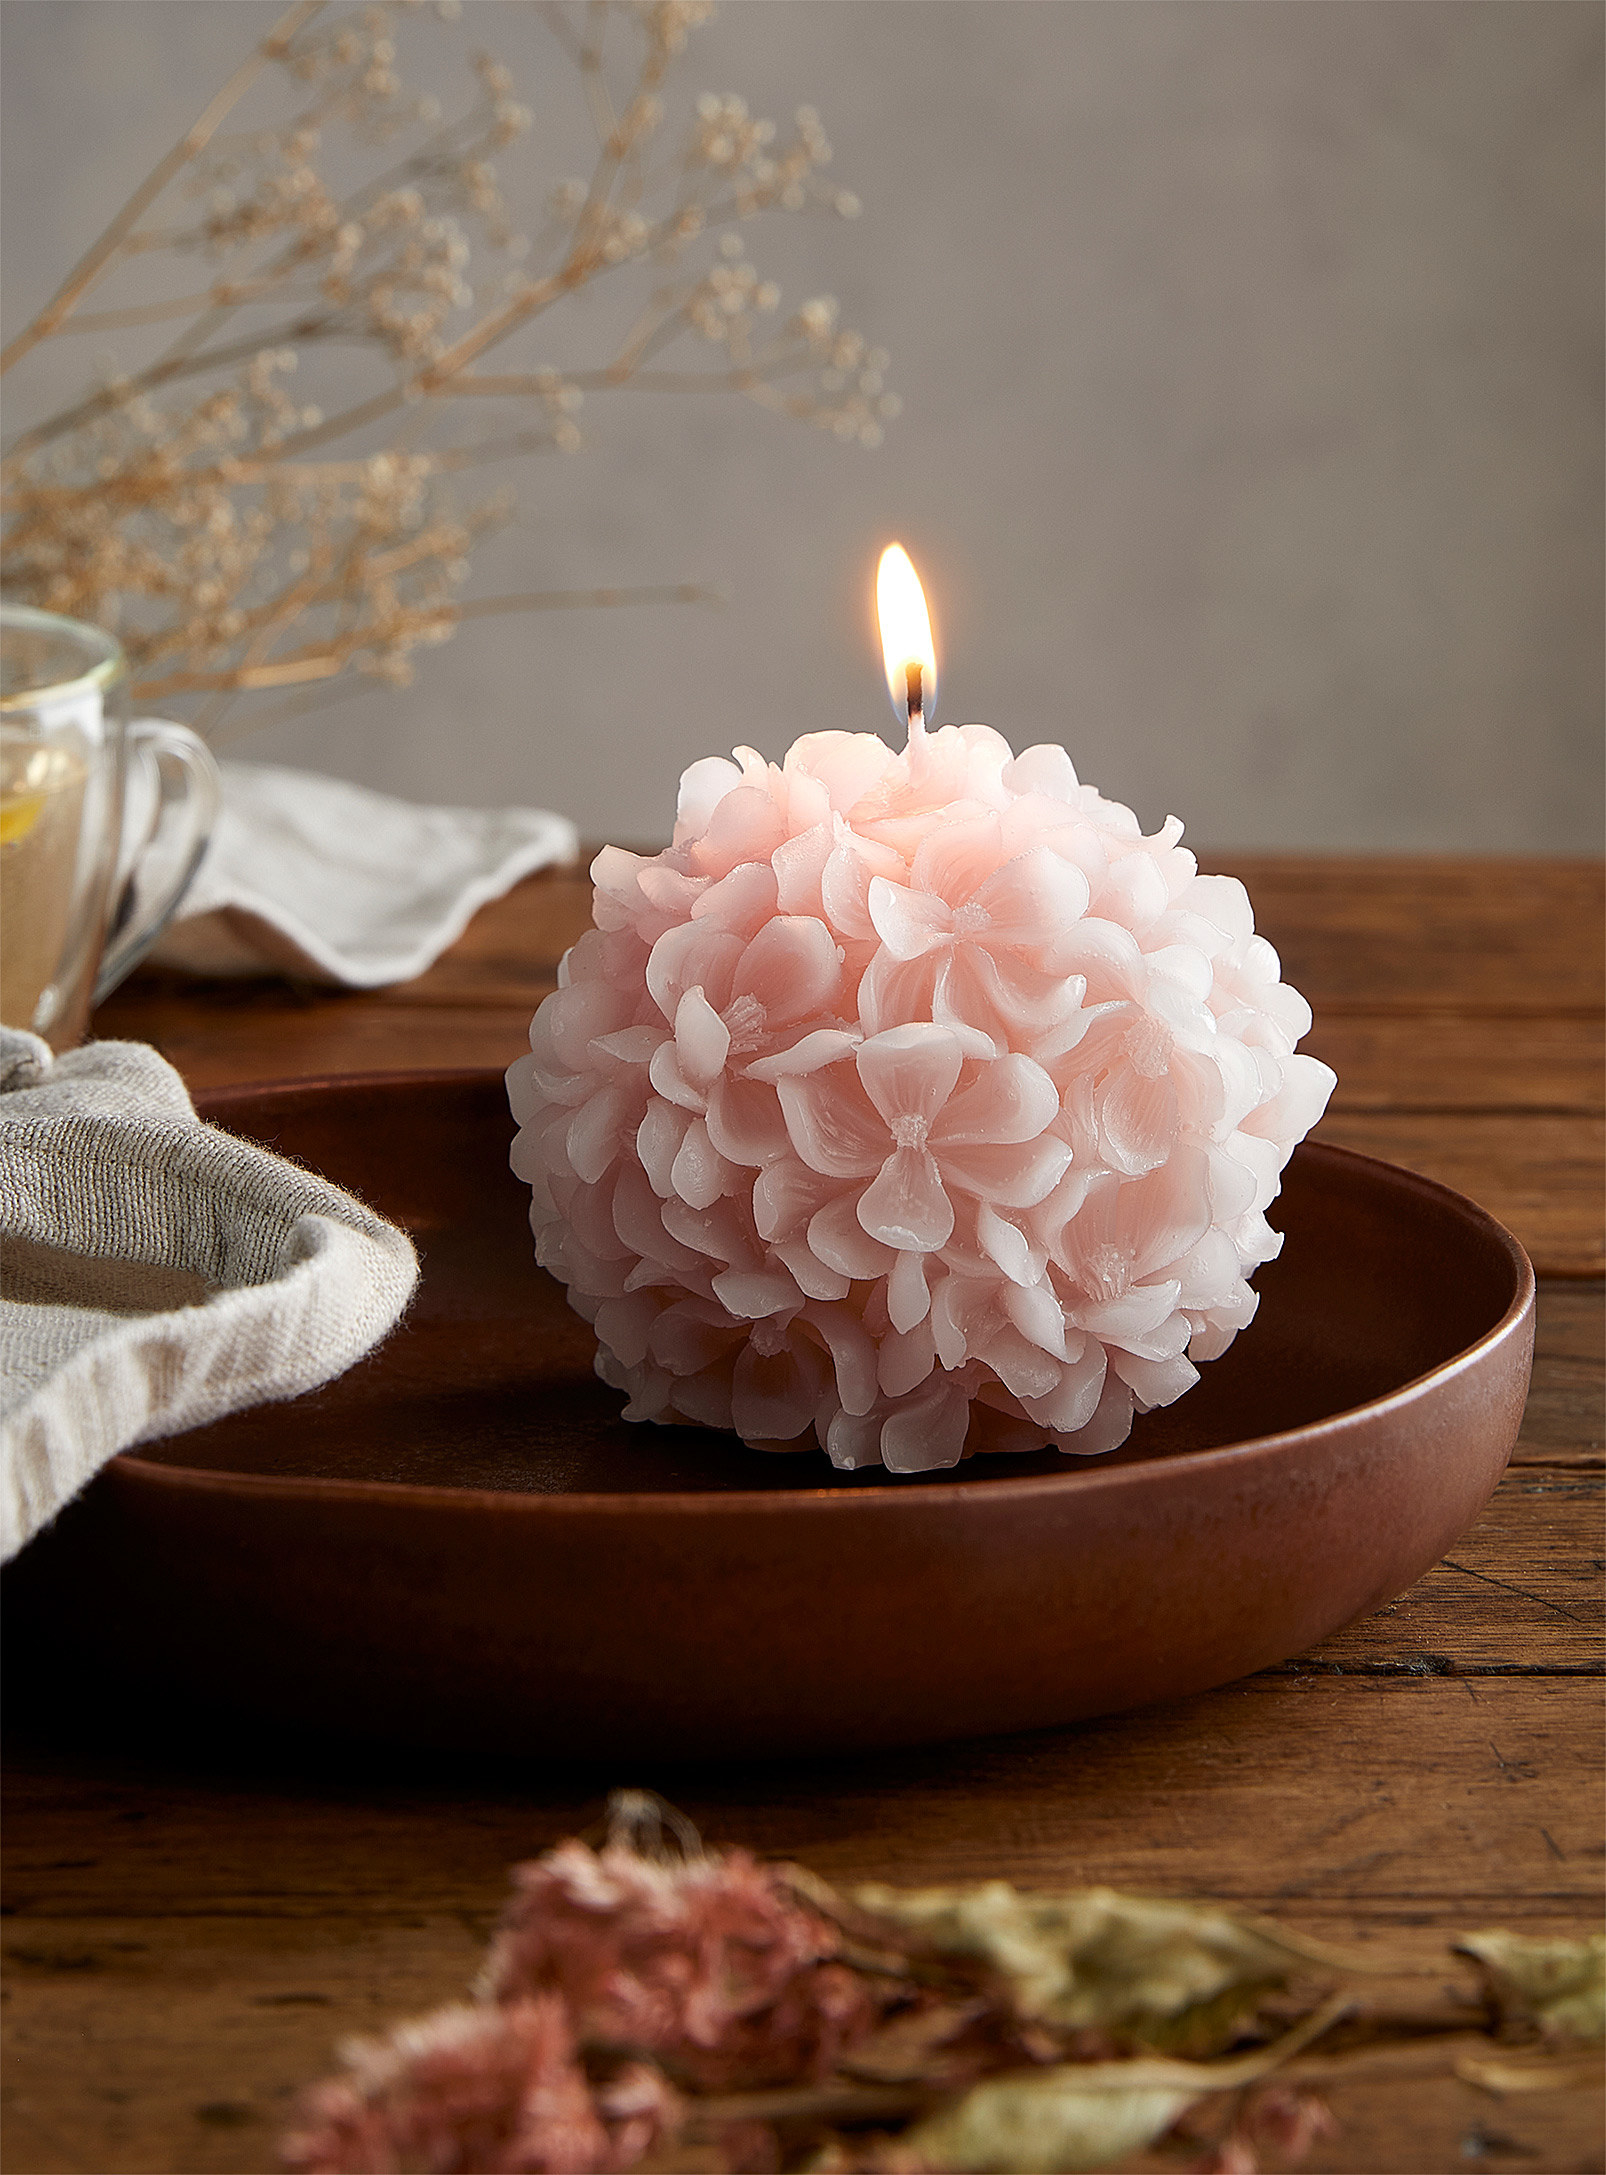 A small round candle that looks like a full hydrangea candle